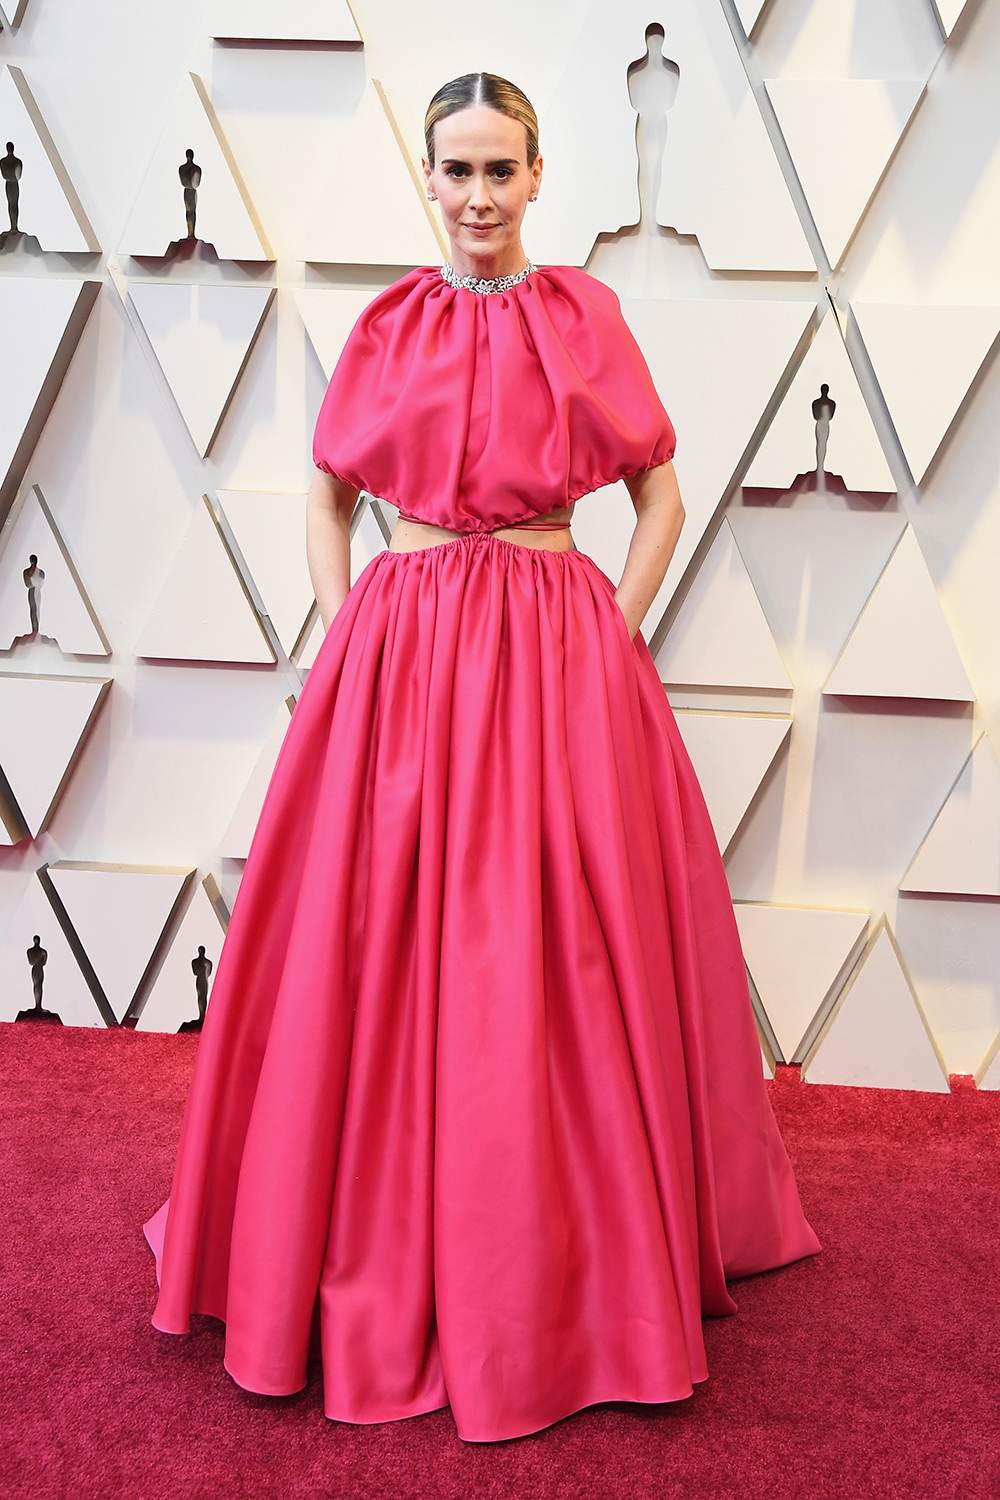 HOLLYWOOD, CA - FEBRUARY 24: Sarah Paulson attends the 91st Annual Academy Awards at Hollywood and Highland on February 24, 2019 in Hollywood, California. (Photo by Steve Granitz/WireImage)